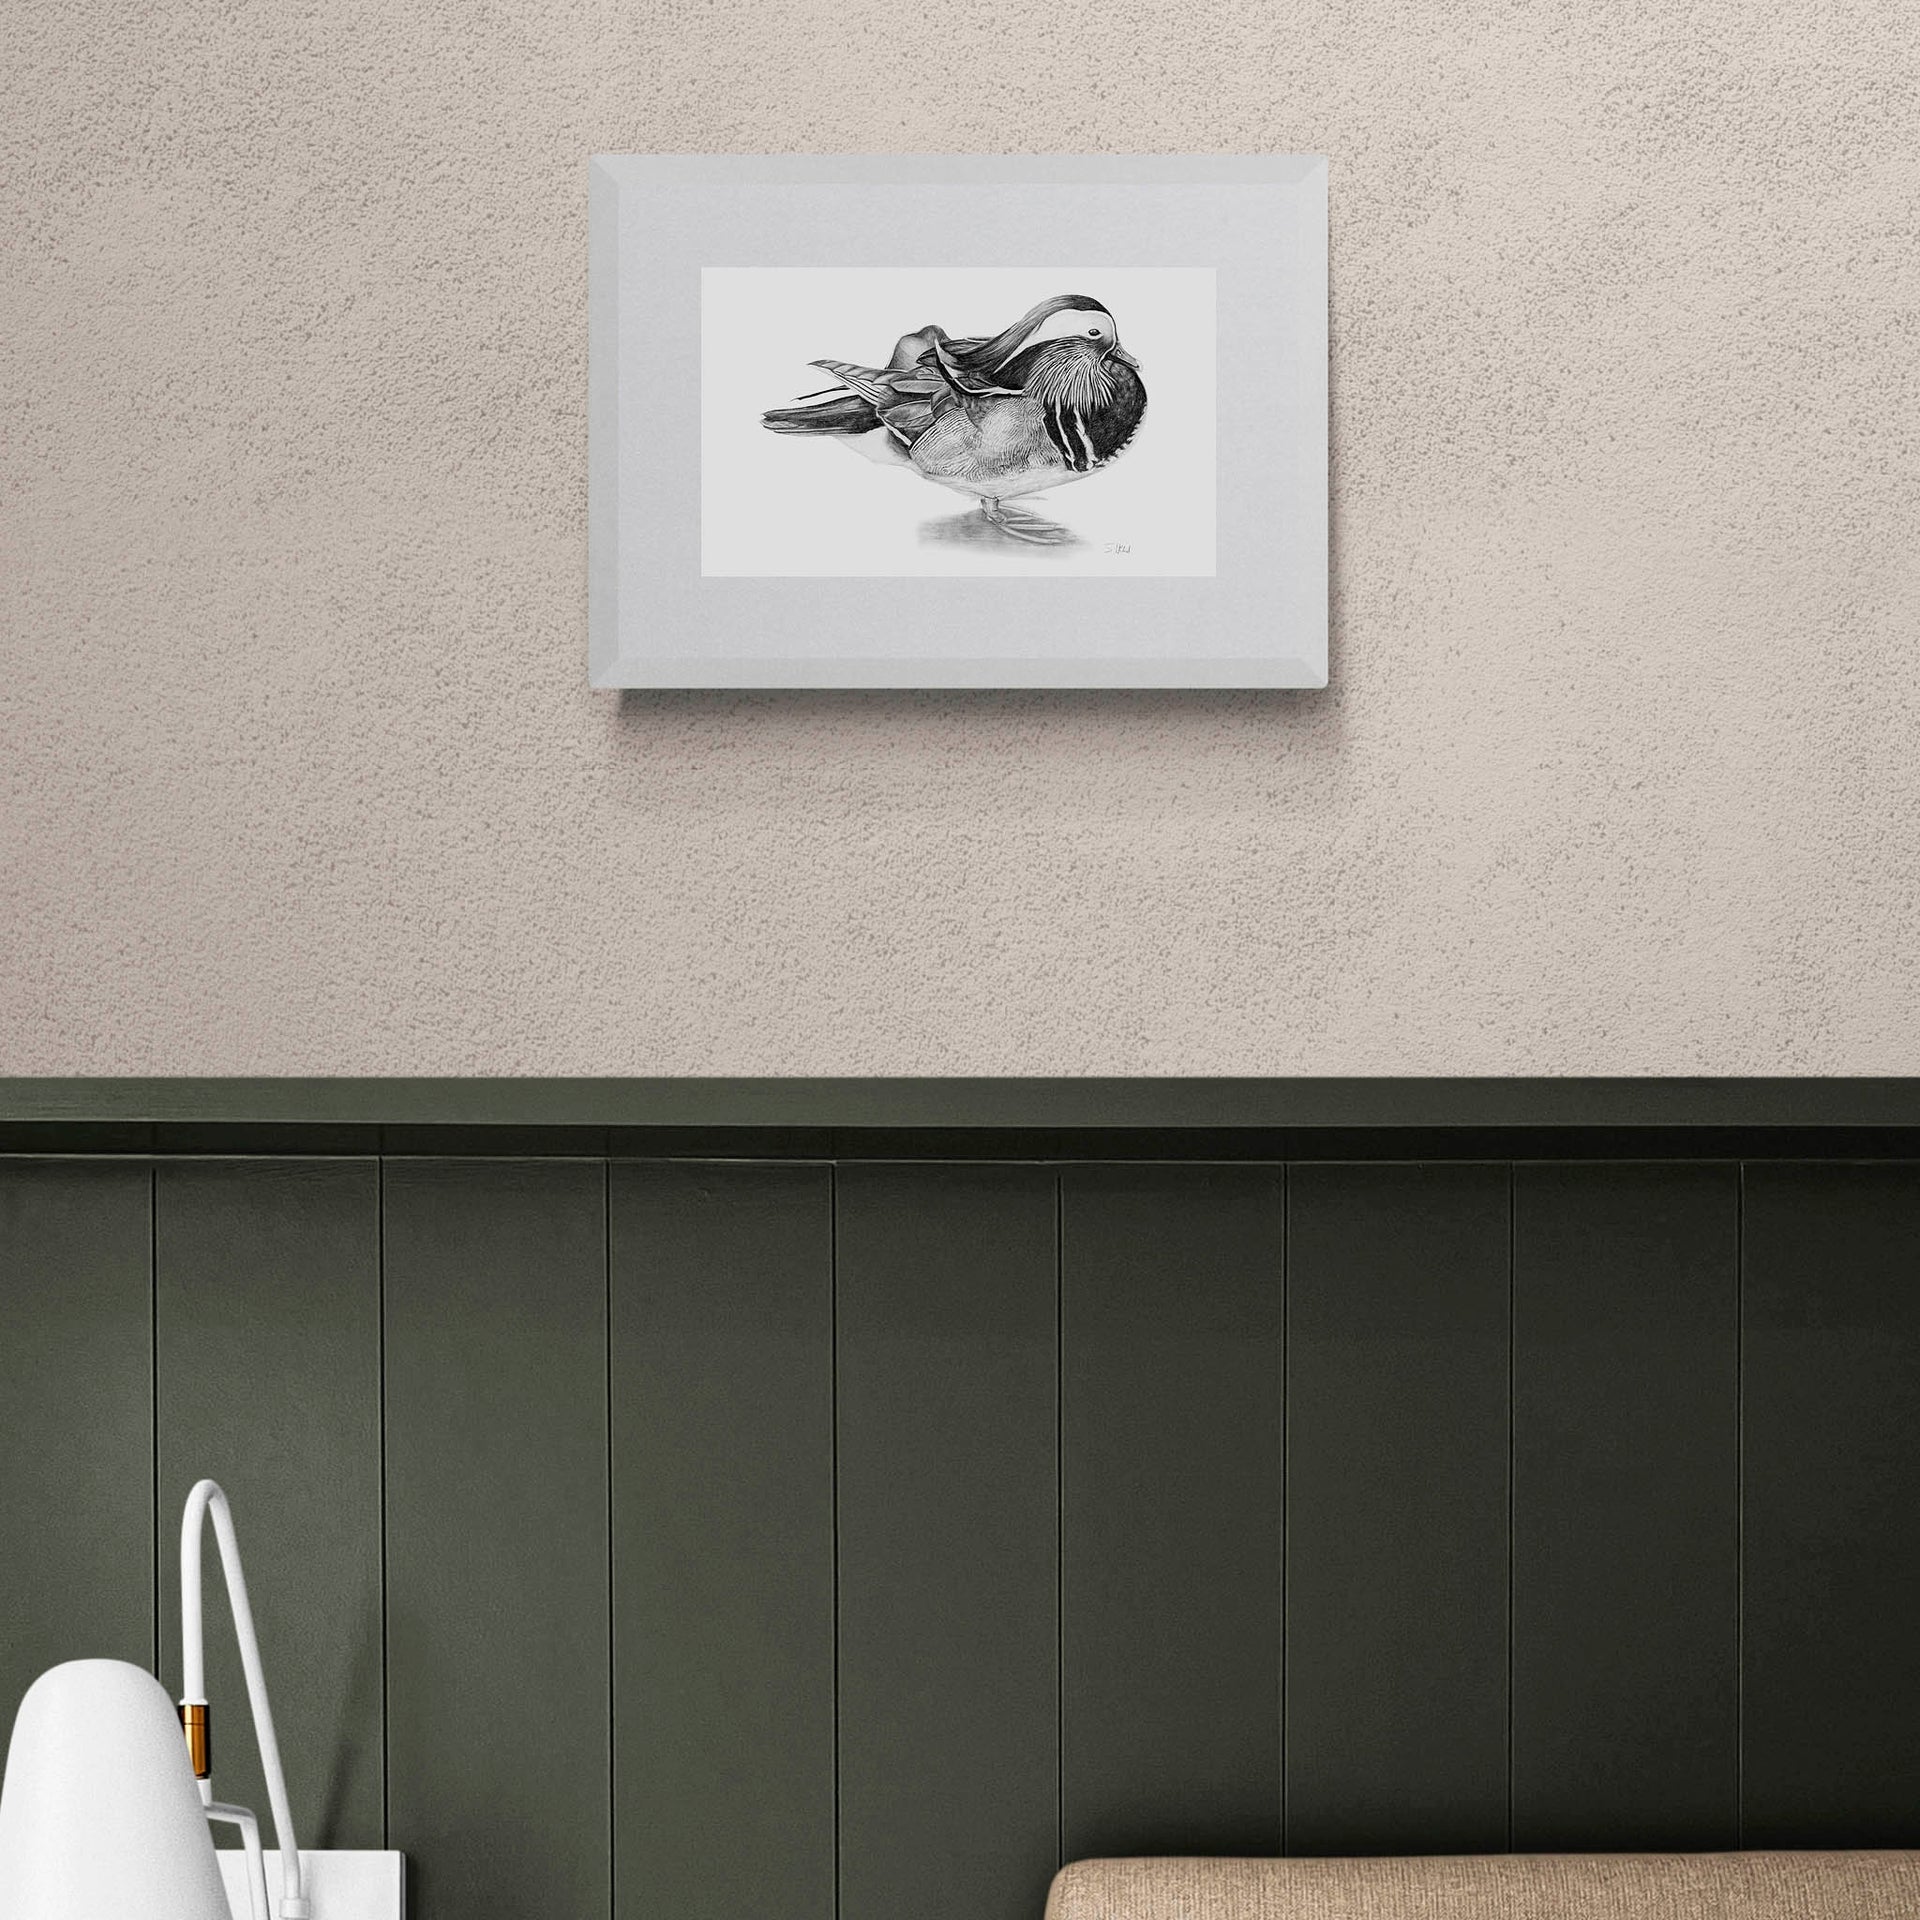 Mandarin duck pencil drawing print in frame on the wall